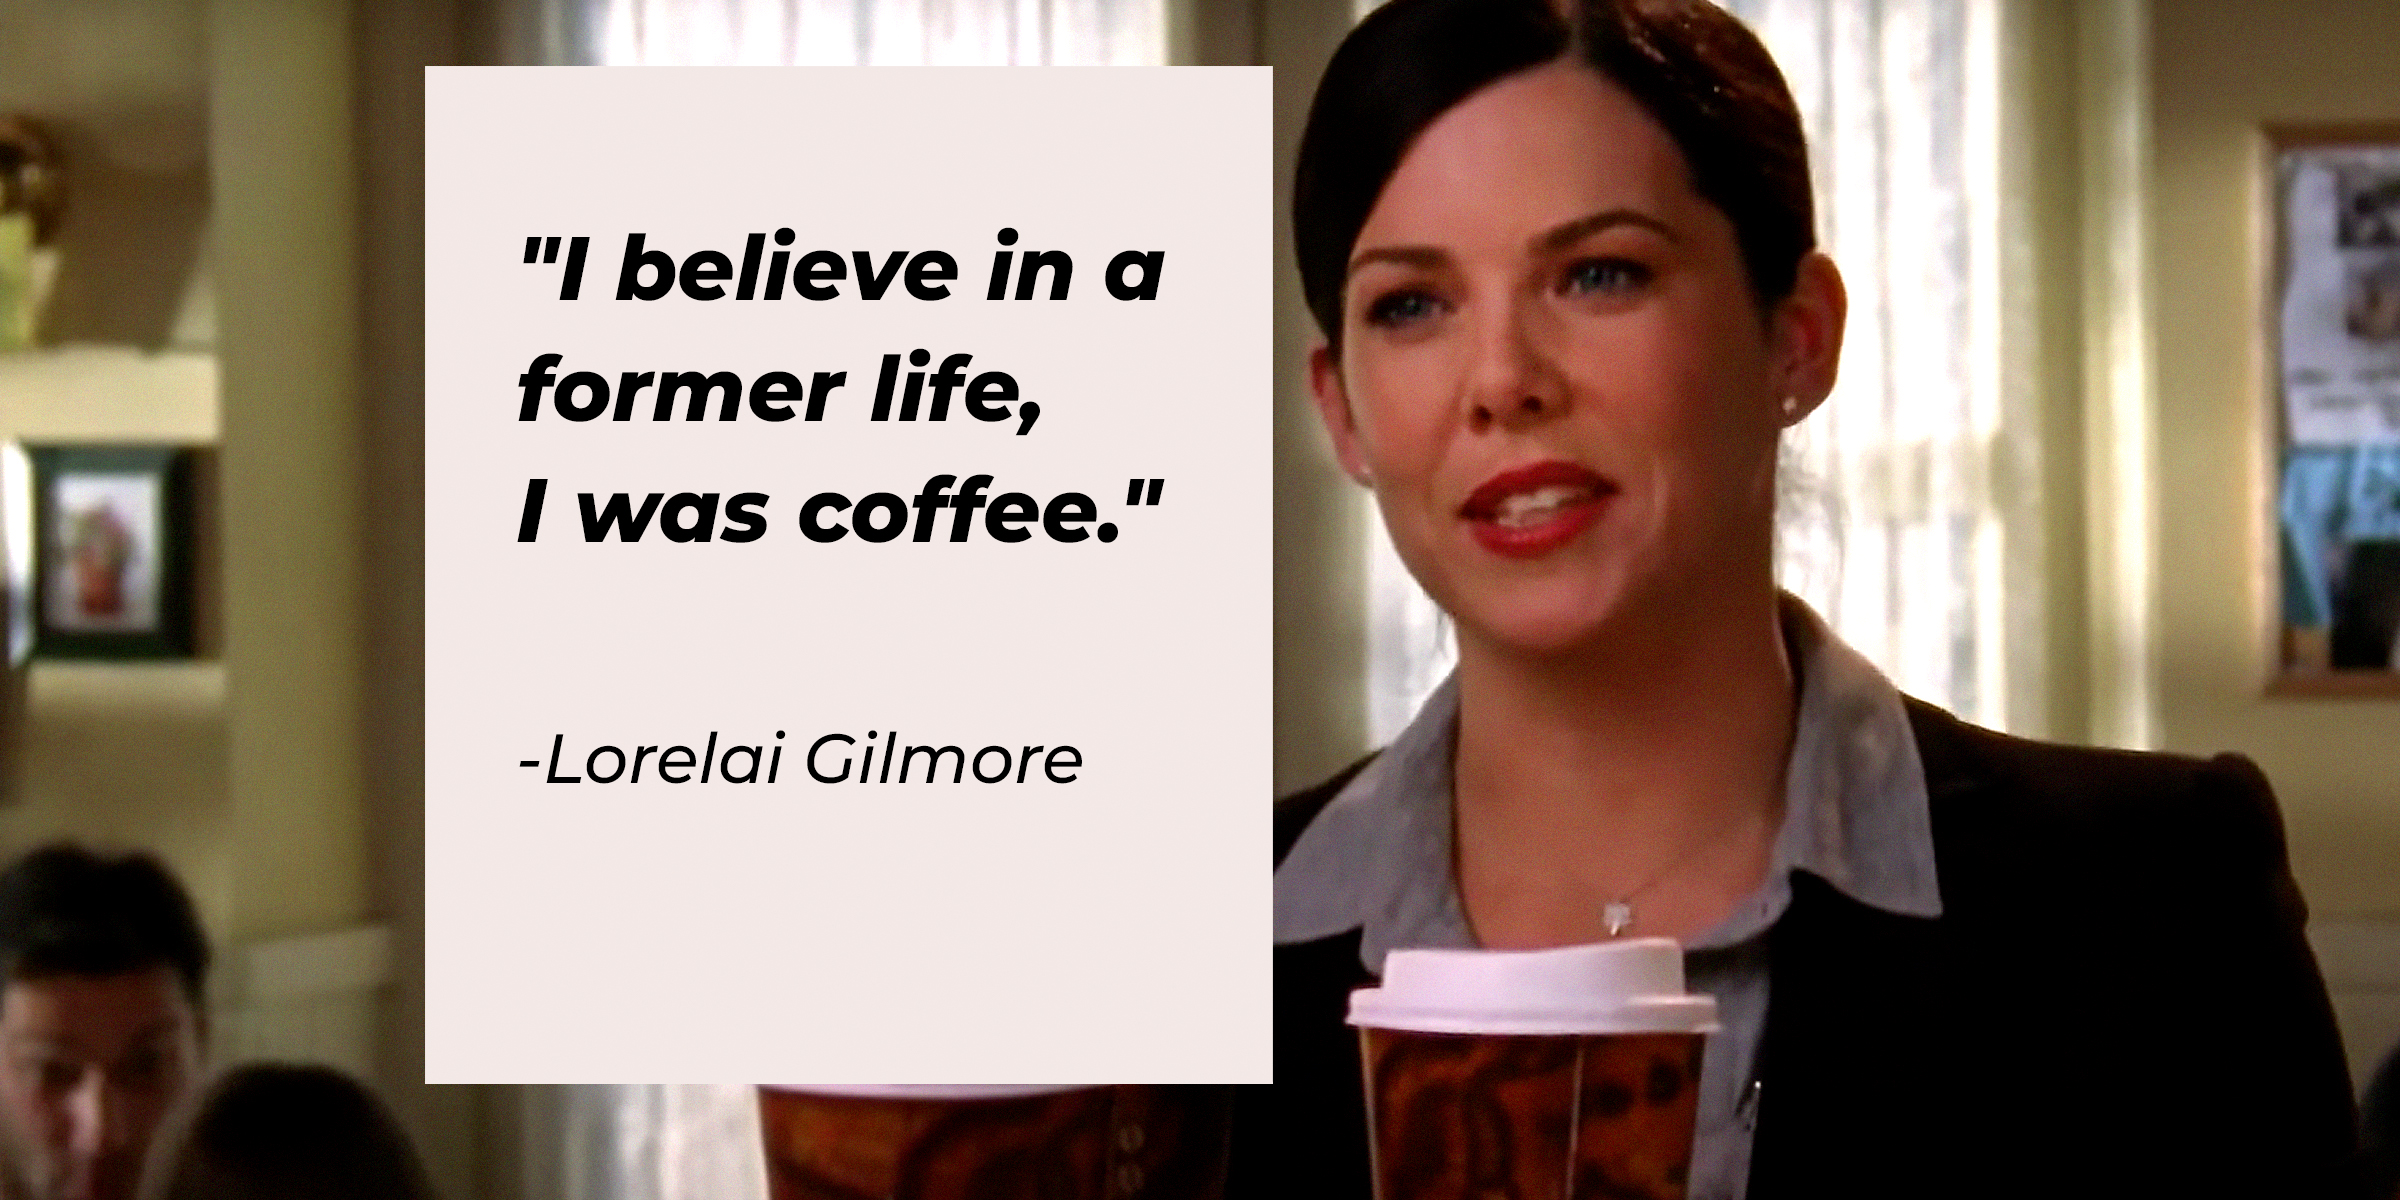 A photo of Lorelai Gilmore with her quote: "I believe in a former life, I was coffee." | Source: facebook.com/GilmoreGirls